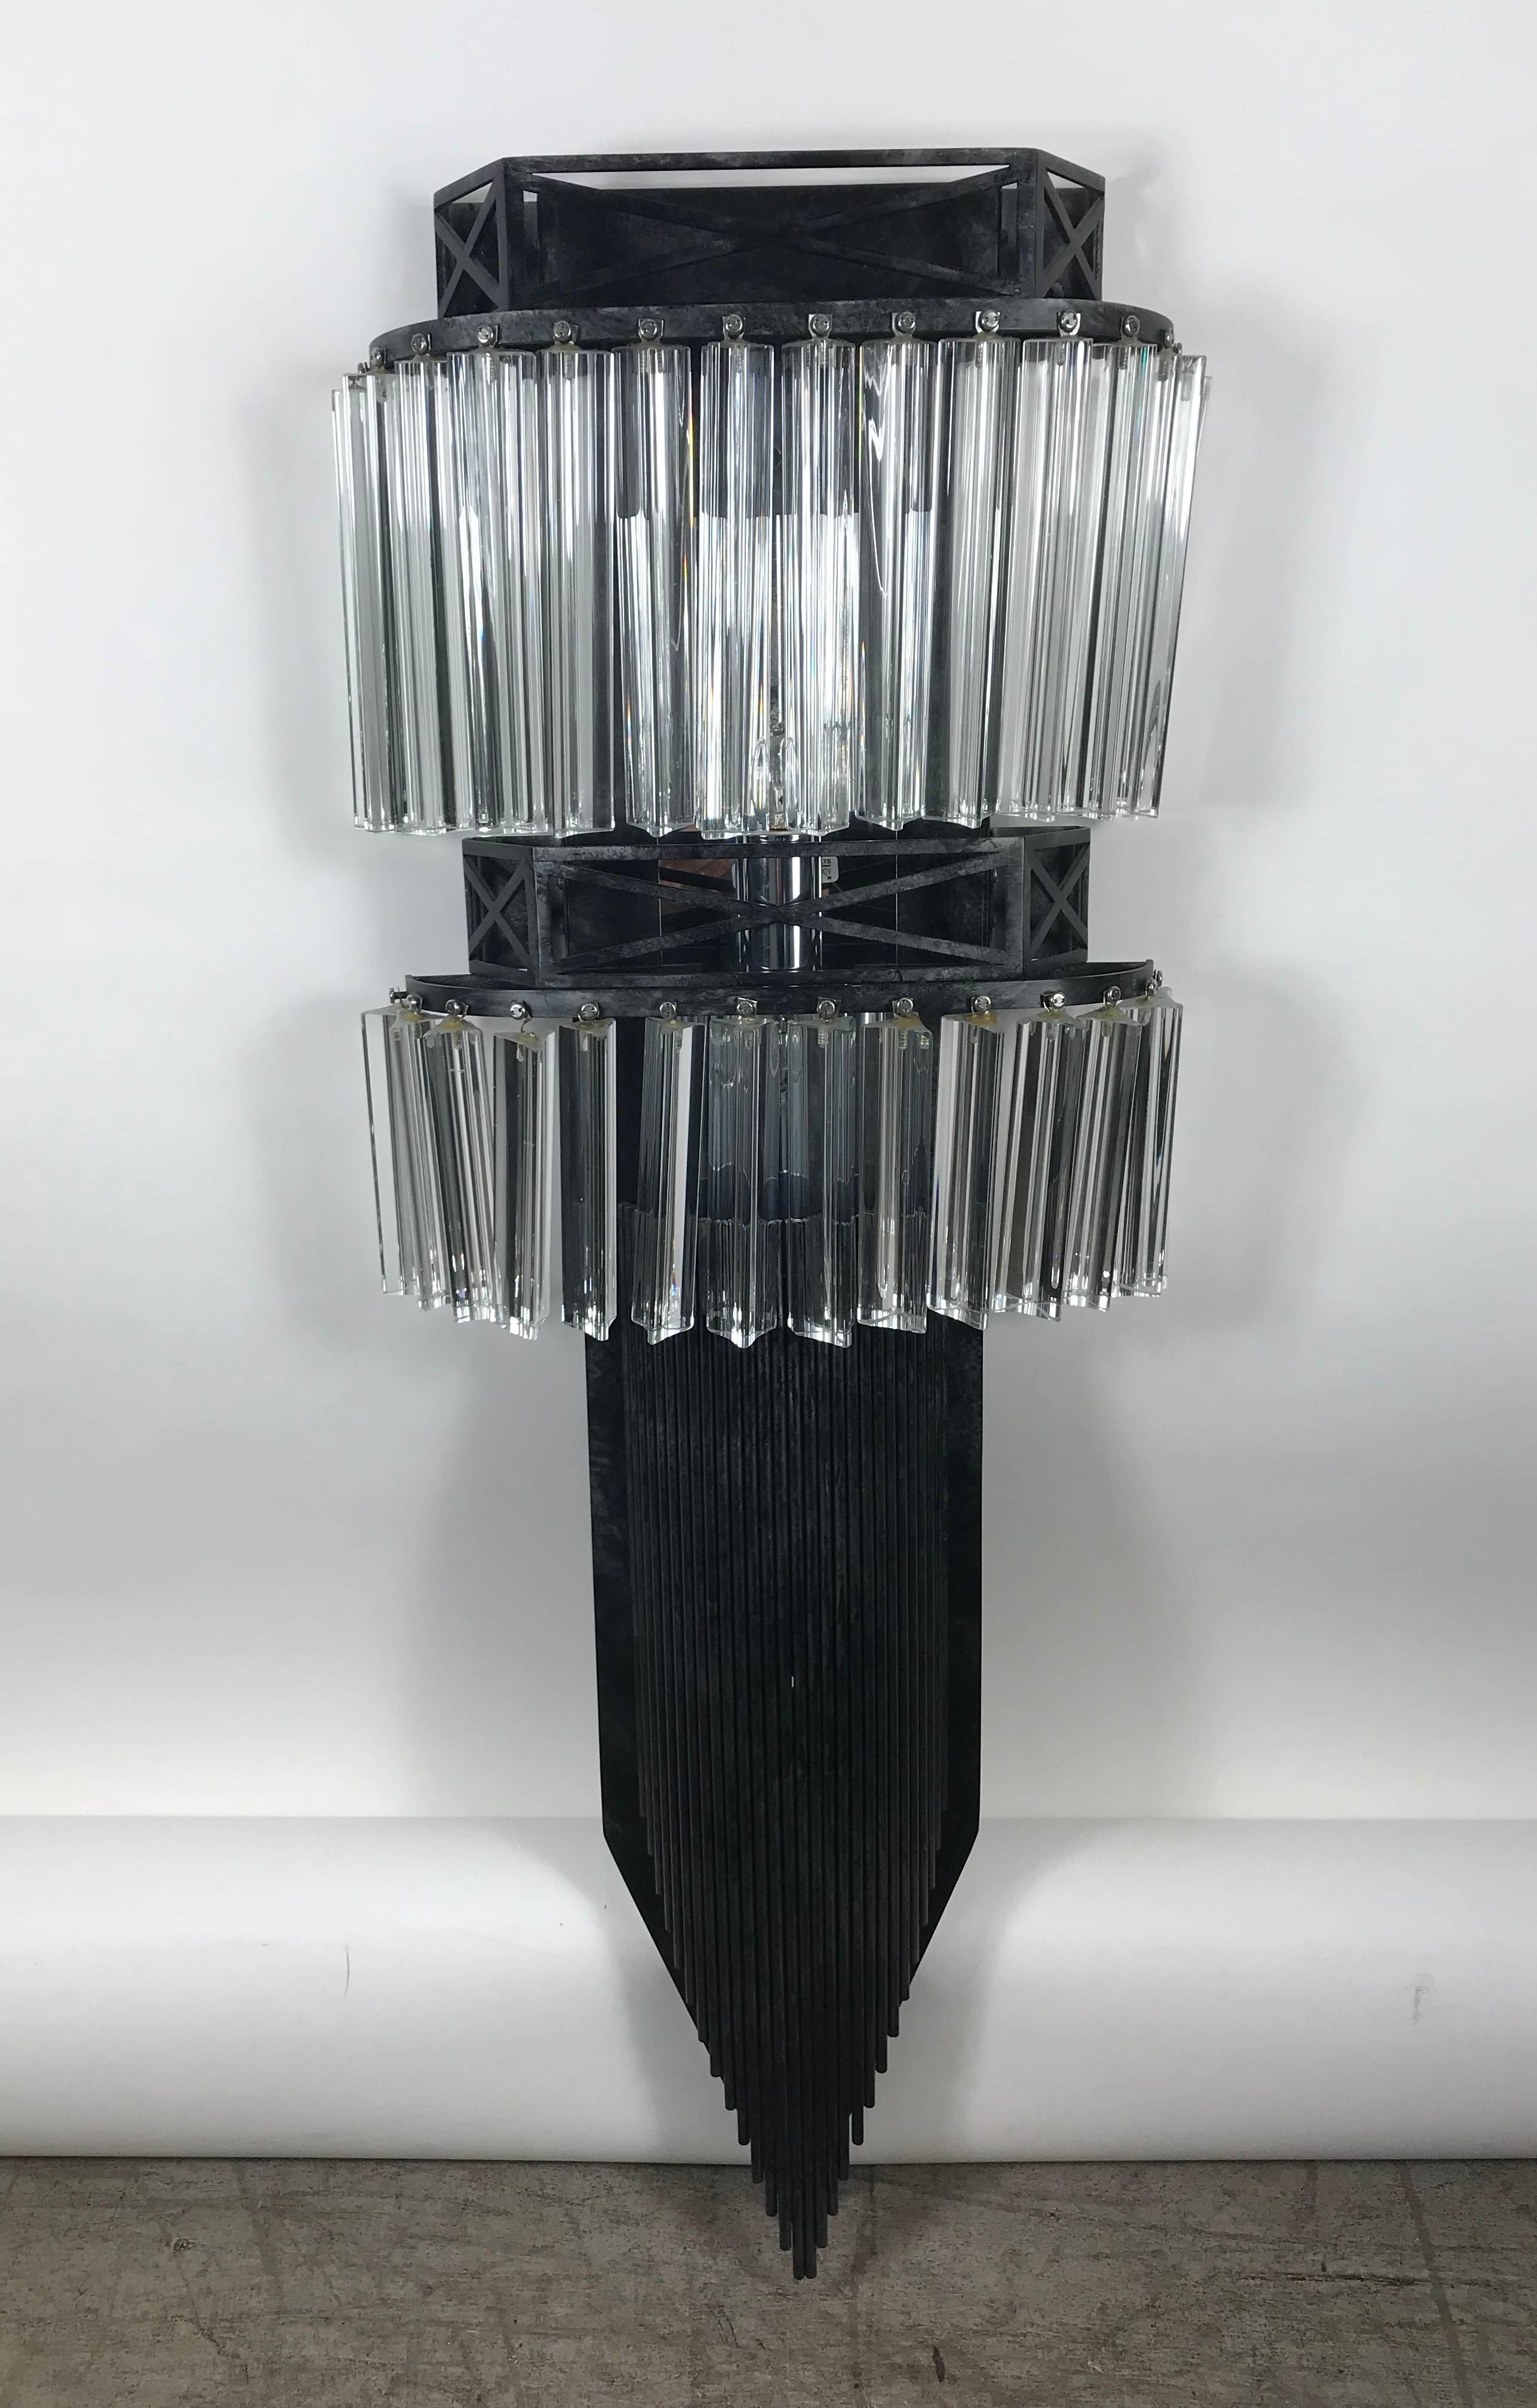 Amazing design! Brutalist meets elegance, set of 12 matching Venini glass and Iron wall sconces, measuring 42 inches high, feature approximate 24 three-sided (triangular) Venini glass hanging crystals, top row measuring 8 inch bottom row 6 inch